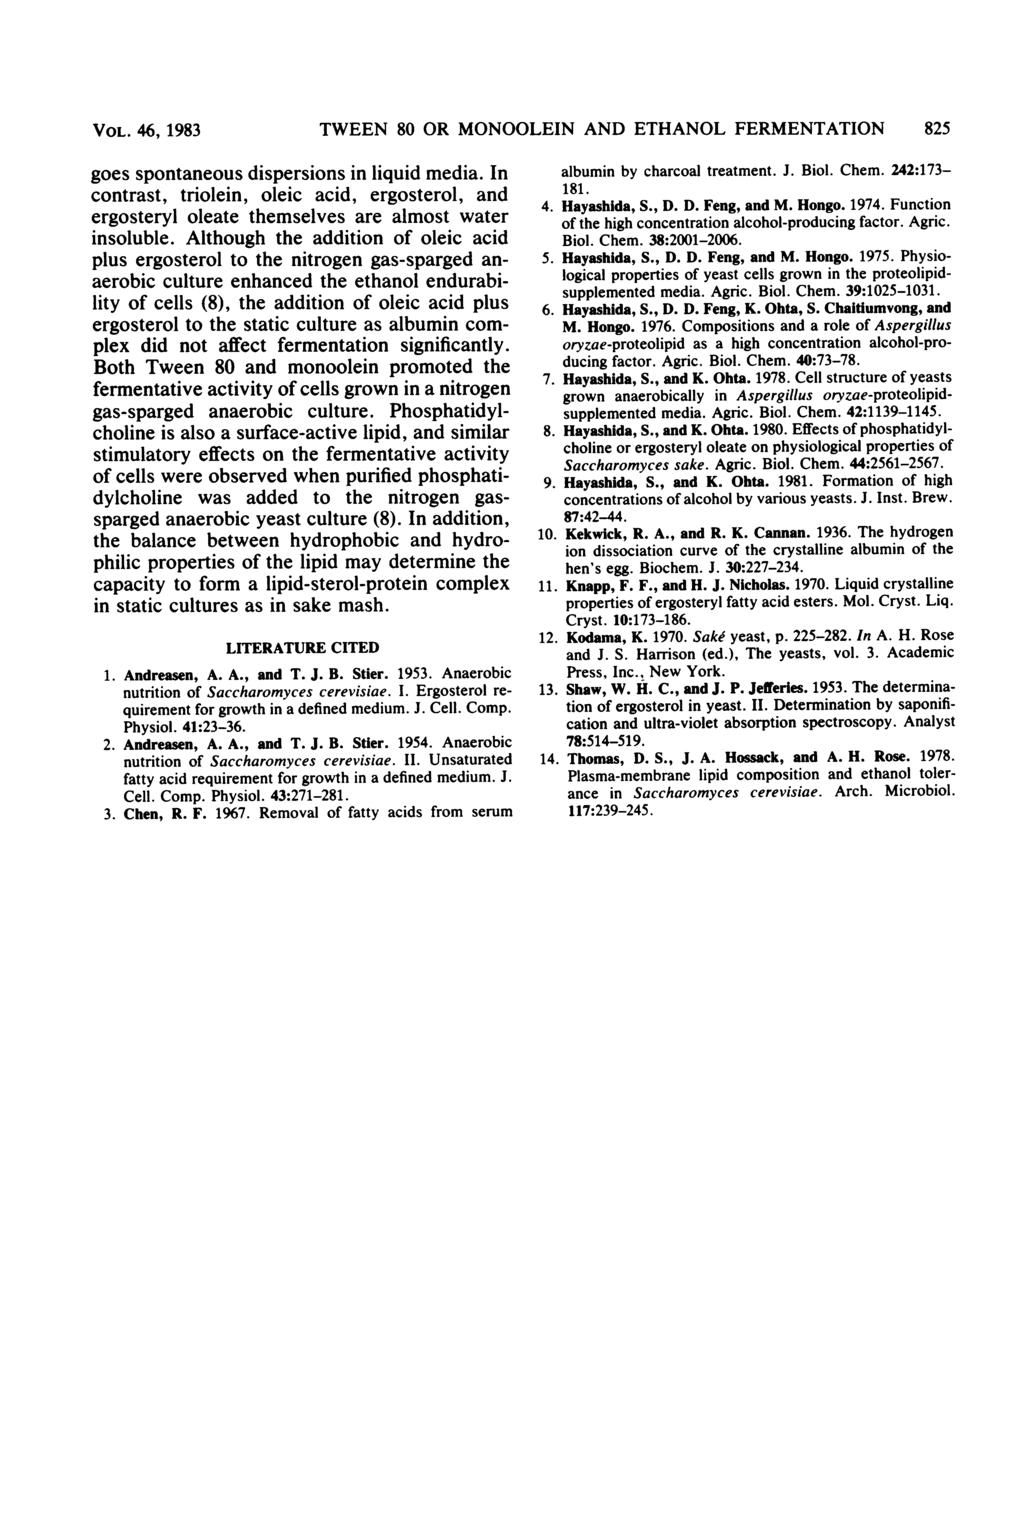 VOL. 46, 1983 goes spontaneous dispersions in liquid media. In contrast, triolein, oleic acid, ergosterol, and ergosteryl oleate themselves are almost water insoluble.